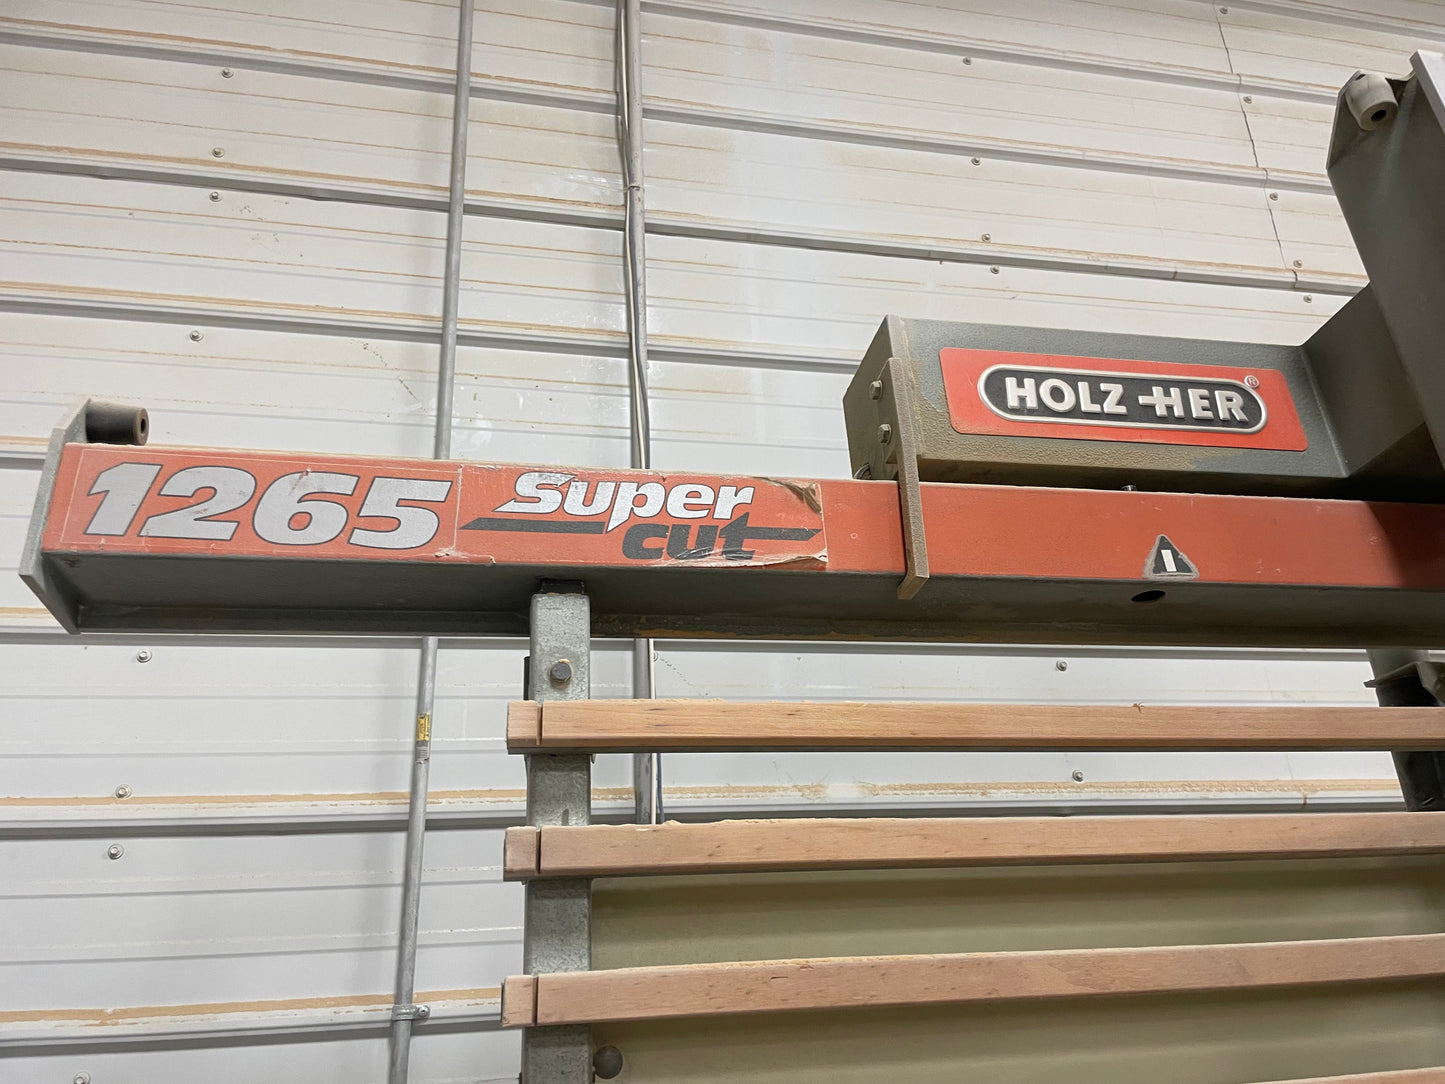 1986 Holzher Vertical Panel Saw - Illinois